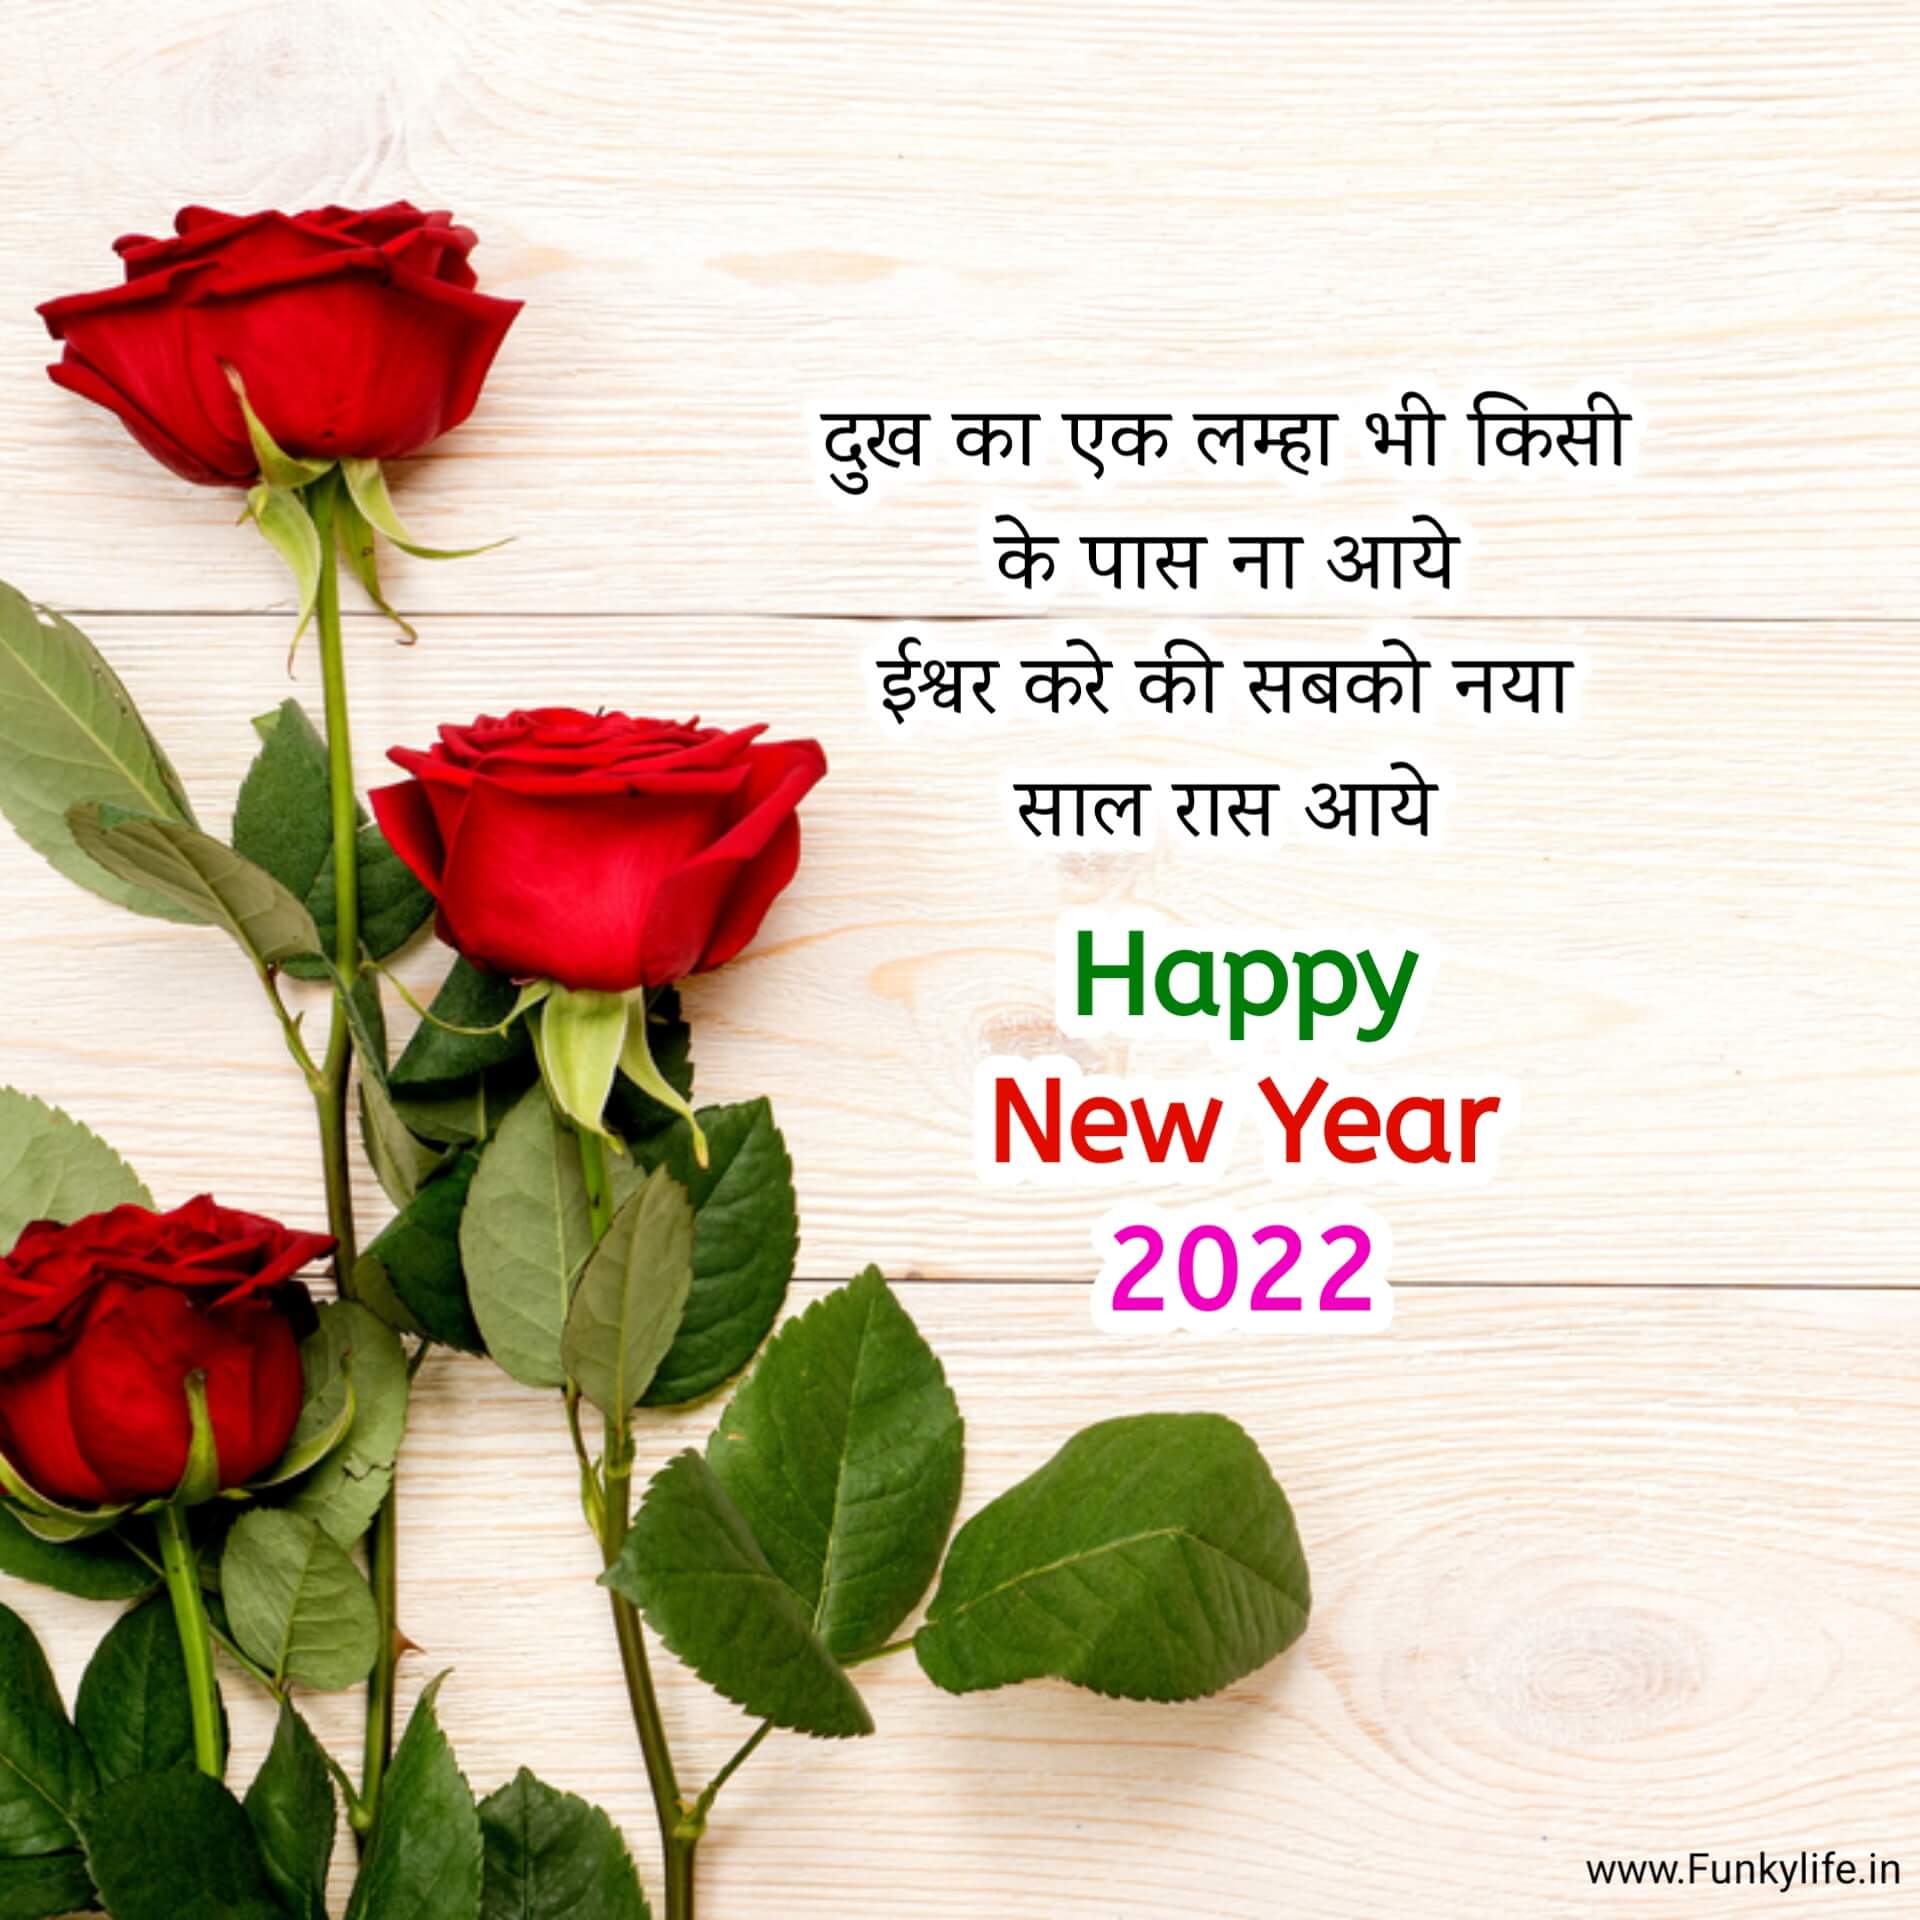 Cute Happy New Year Wishes in Hindi